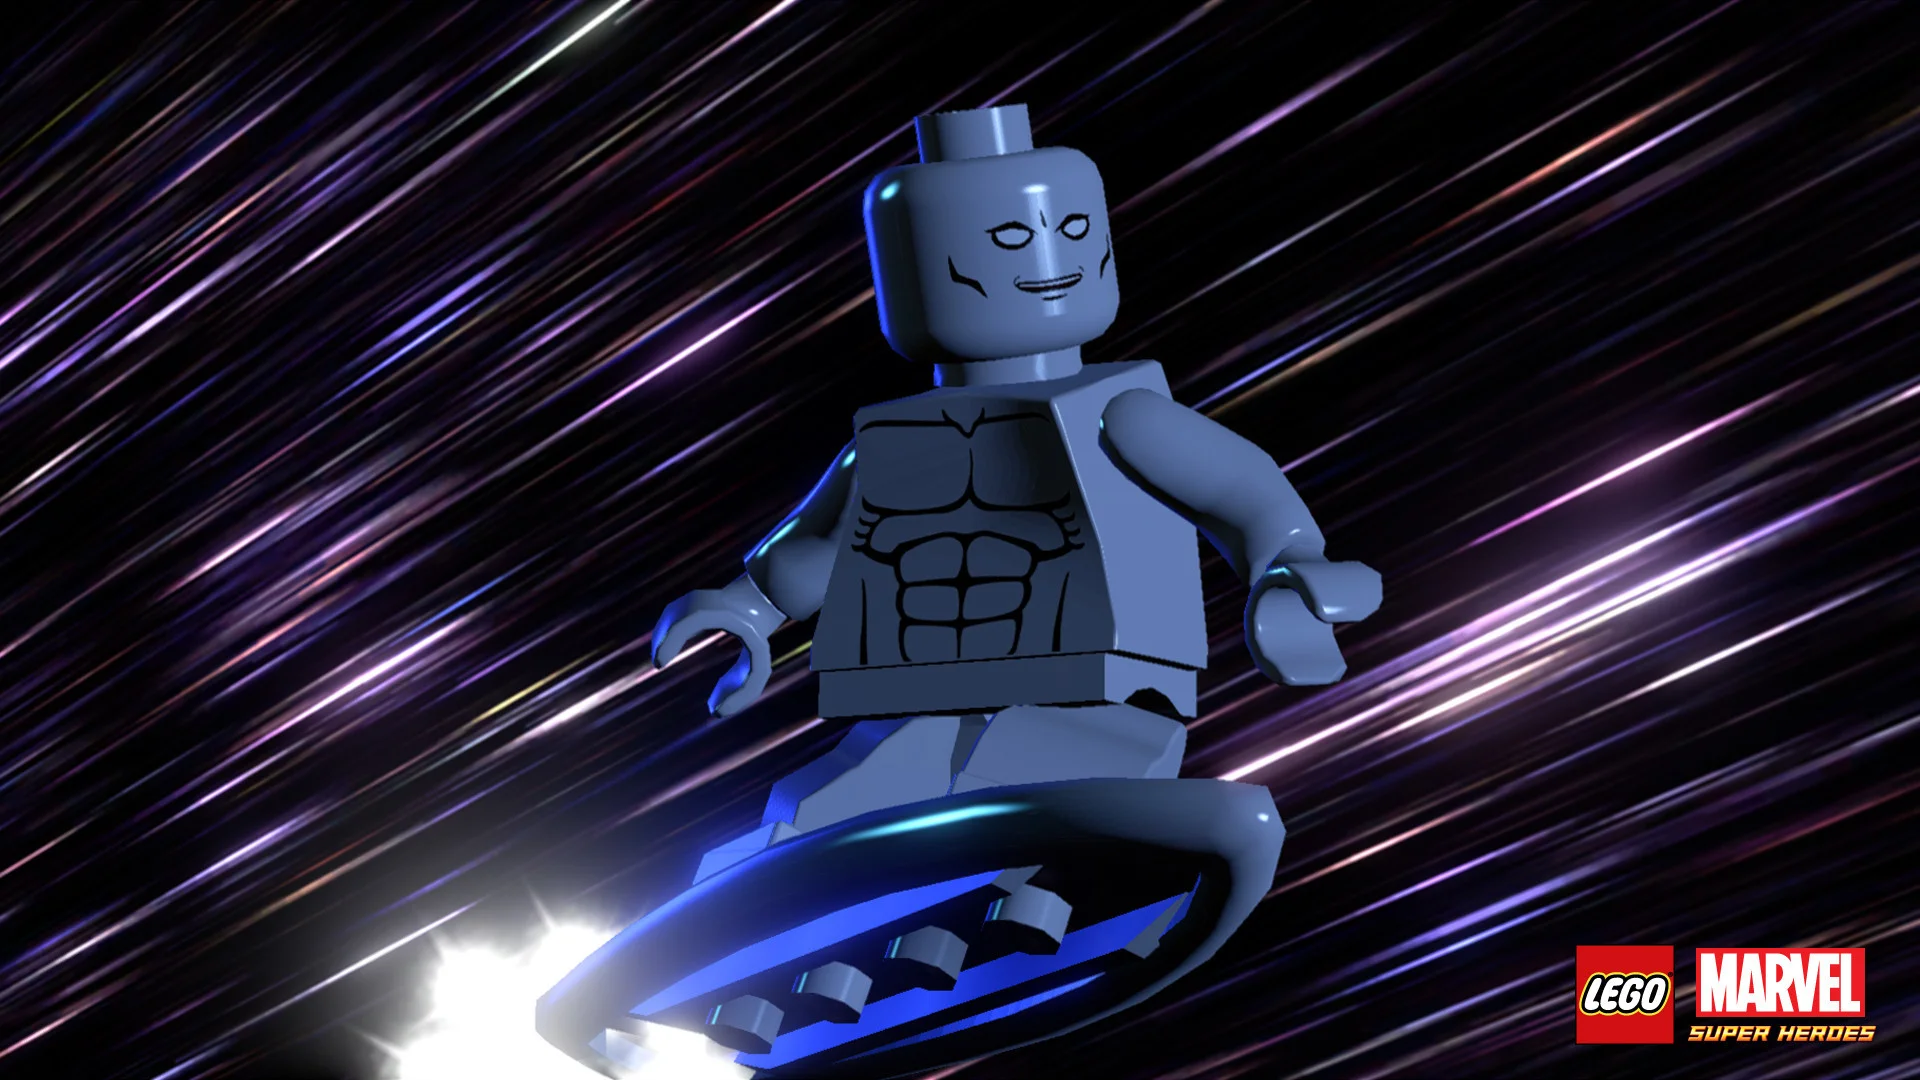 The Silver Surfer as he appears in Lego Marvel Superheroes